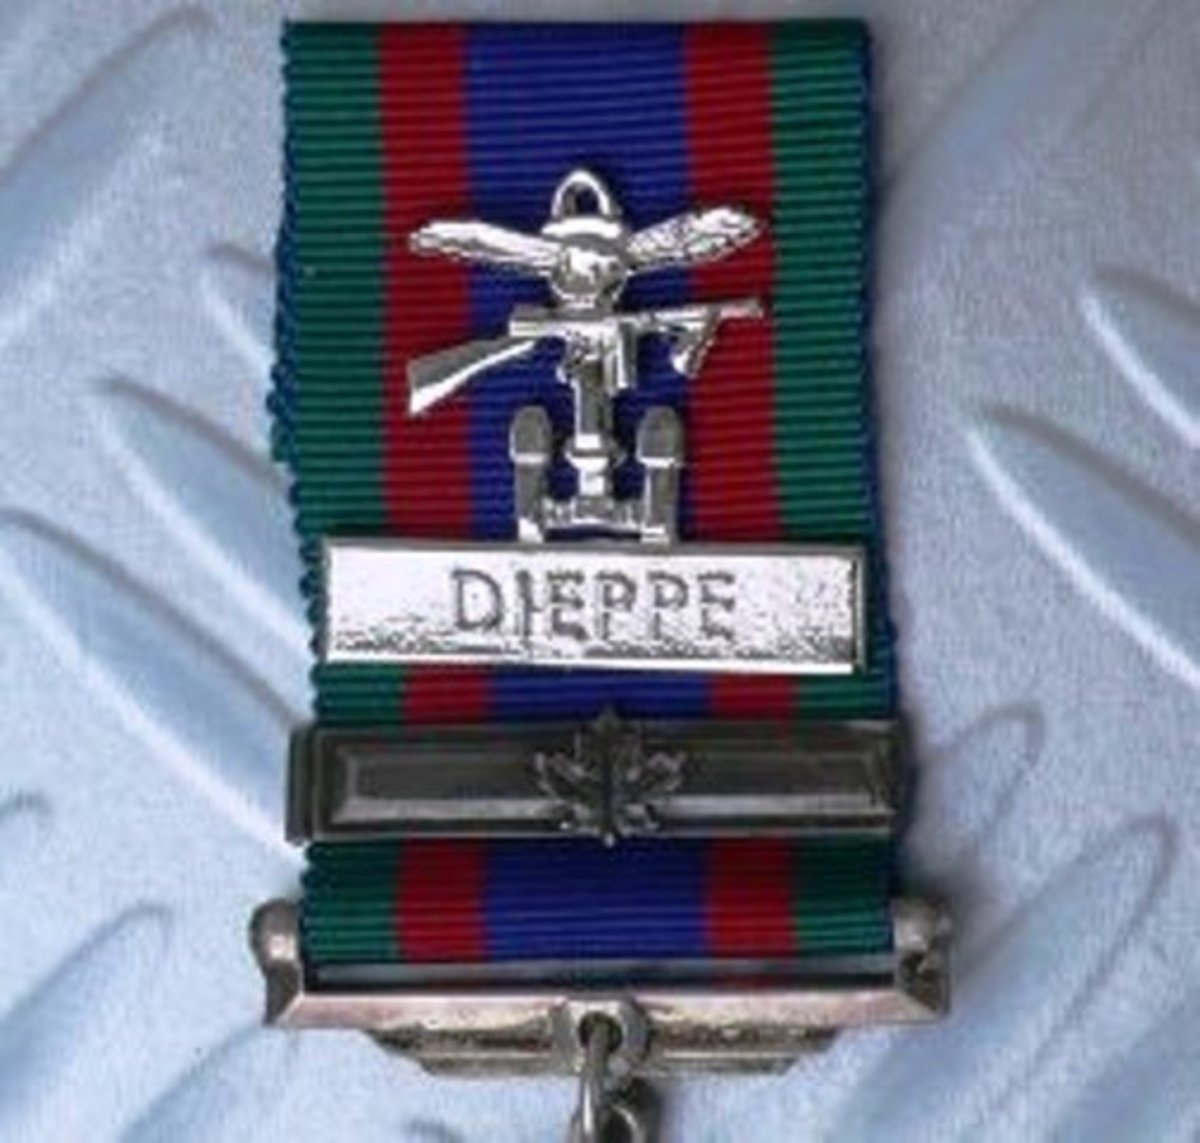 Colonel Merritt earned his posthumous VC escorting RAF radar engineer Jack Nissenthal to the German radar station near Dieppe - note the clasp emblem and nature of the award on the ribbon